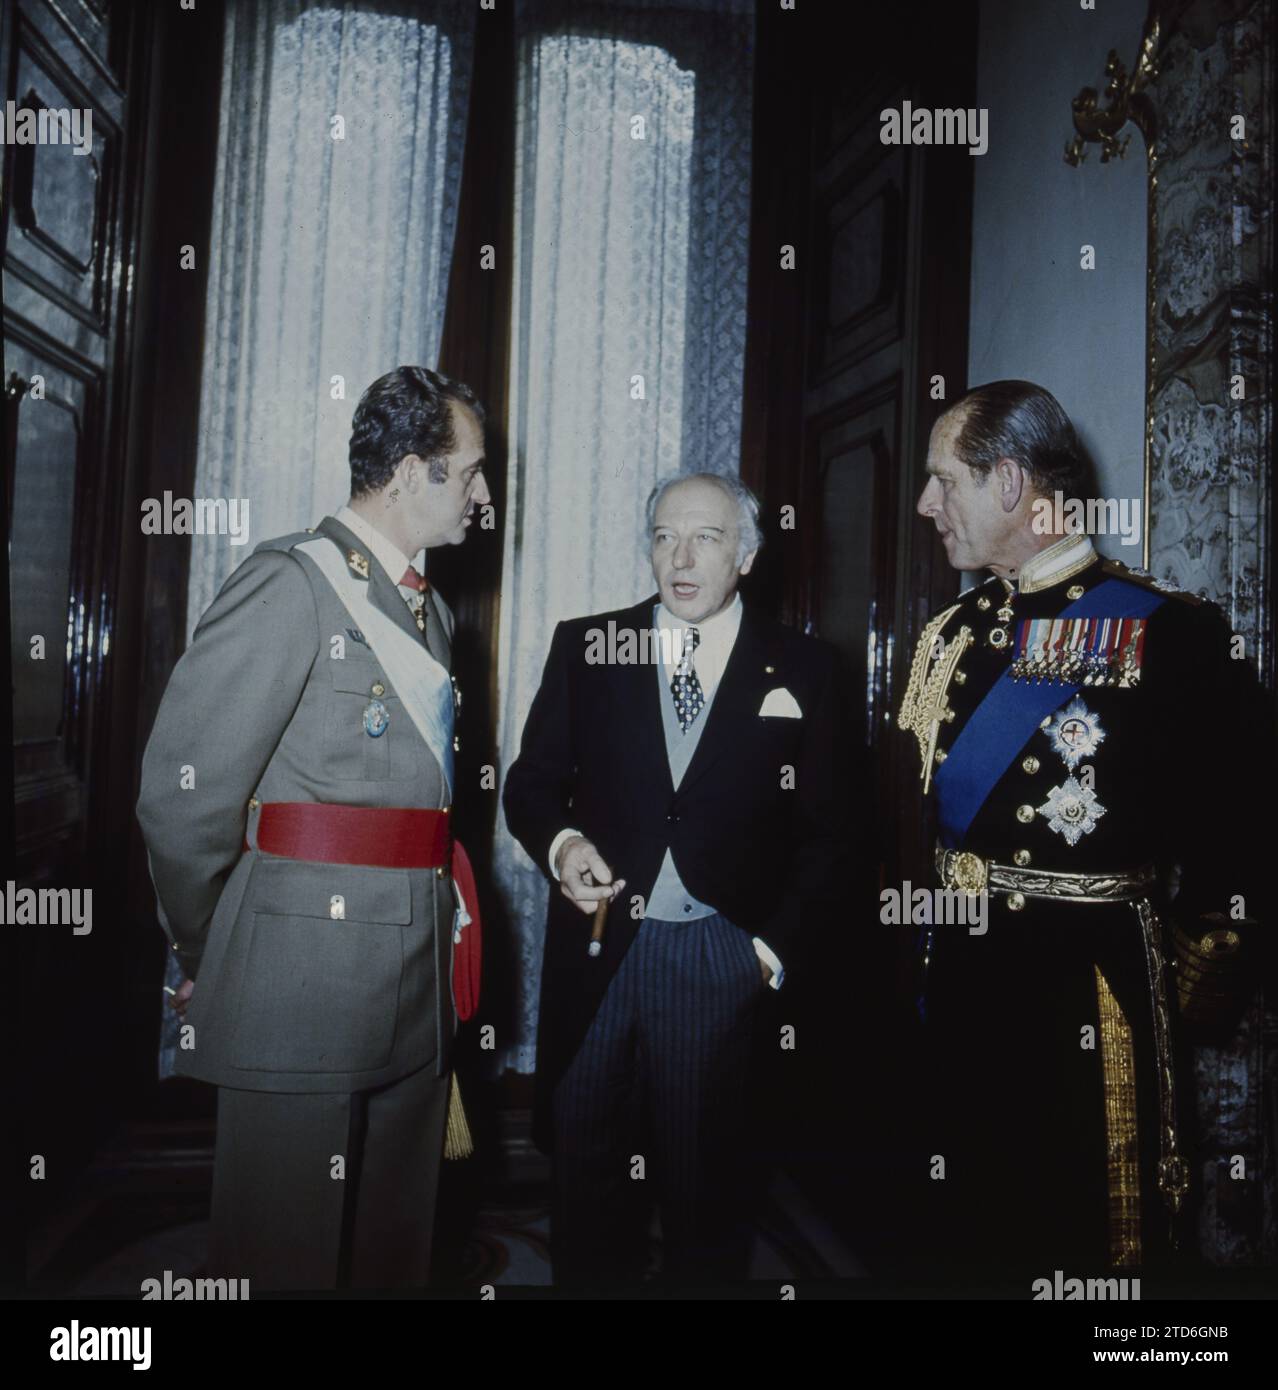 Madrid, 11/27/1975. Acts of exaltation to the Crown. His Majesty King Juan Carlos during the reception that the Sovereigns offered in the Palace to the representatives and personalities arriving in Madrid for his investiture. In the image, with the Duke of Edinburgh and the German president, Walter Scheel. Credit: Album / Archivo ABC Stock Photo